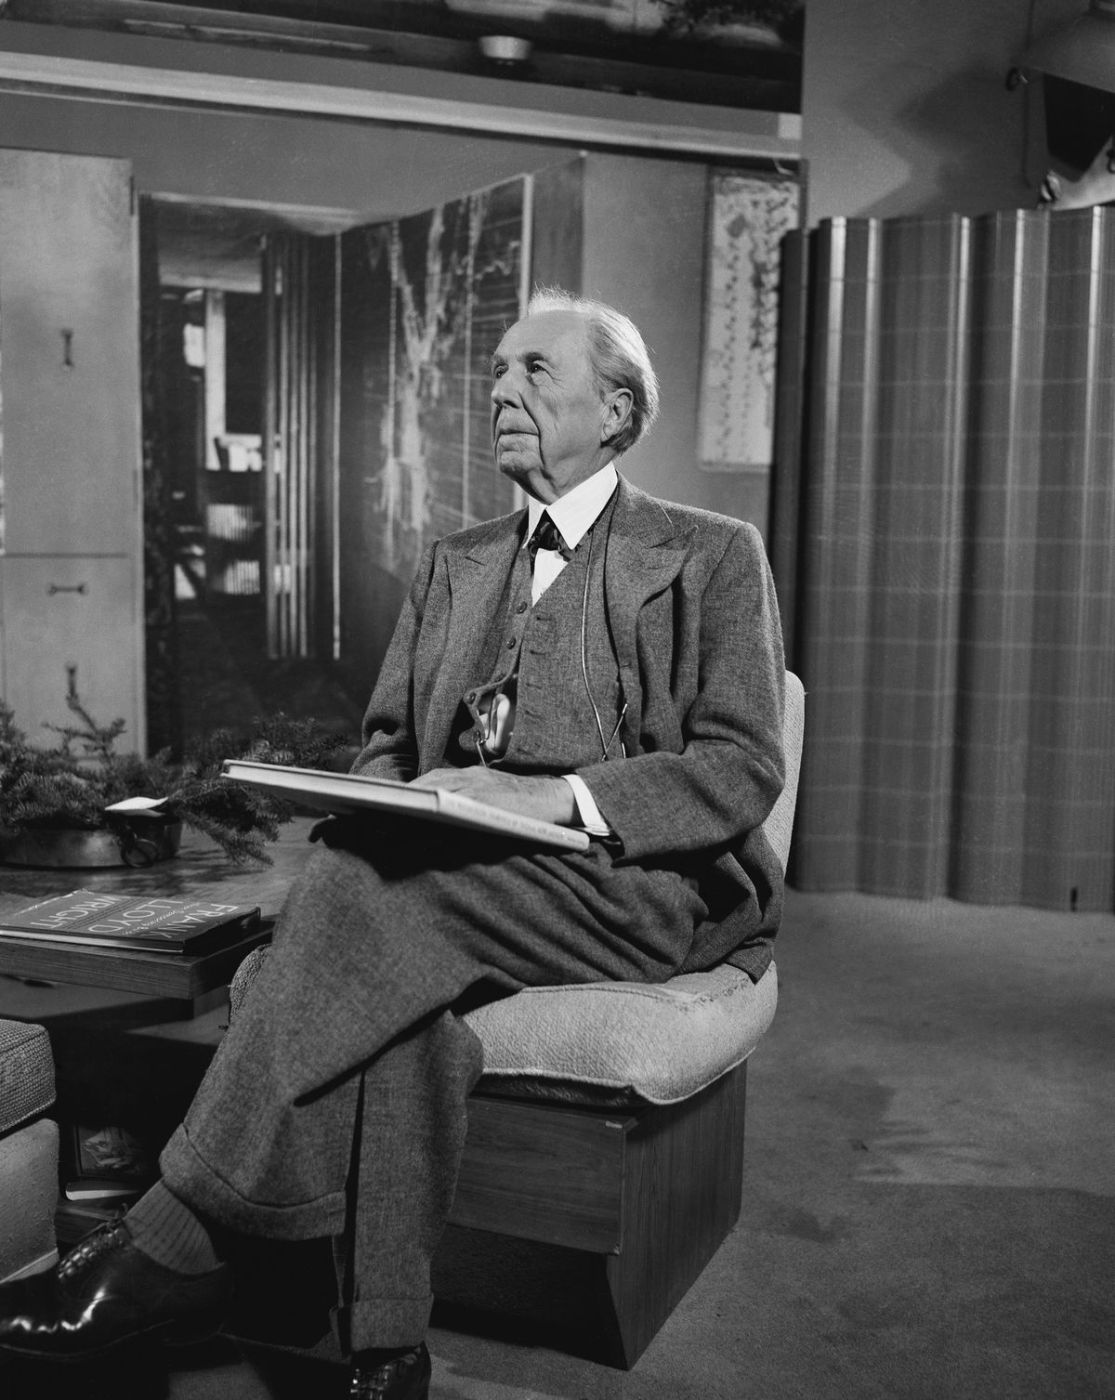 Architect Frank Lloyd Wright, 1952. Although he designed hundreds of houses over a career spanning 70 years, the Laurent residence was the only one built specifically to accommodate an owner with disabilities. (NBC/Getty Images)